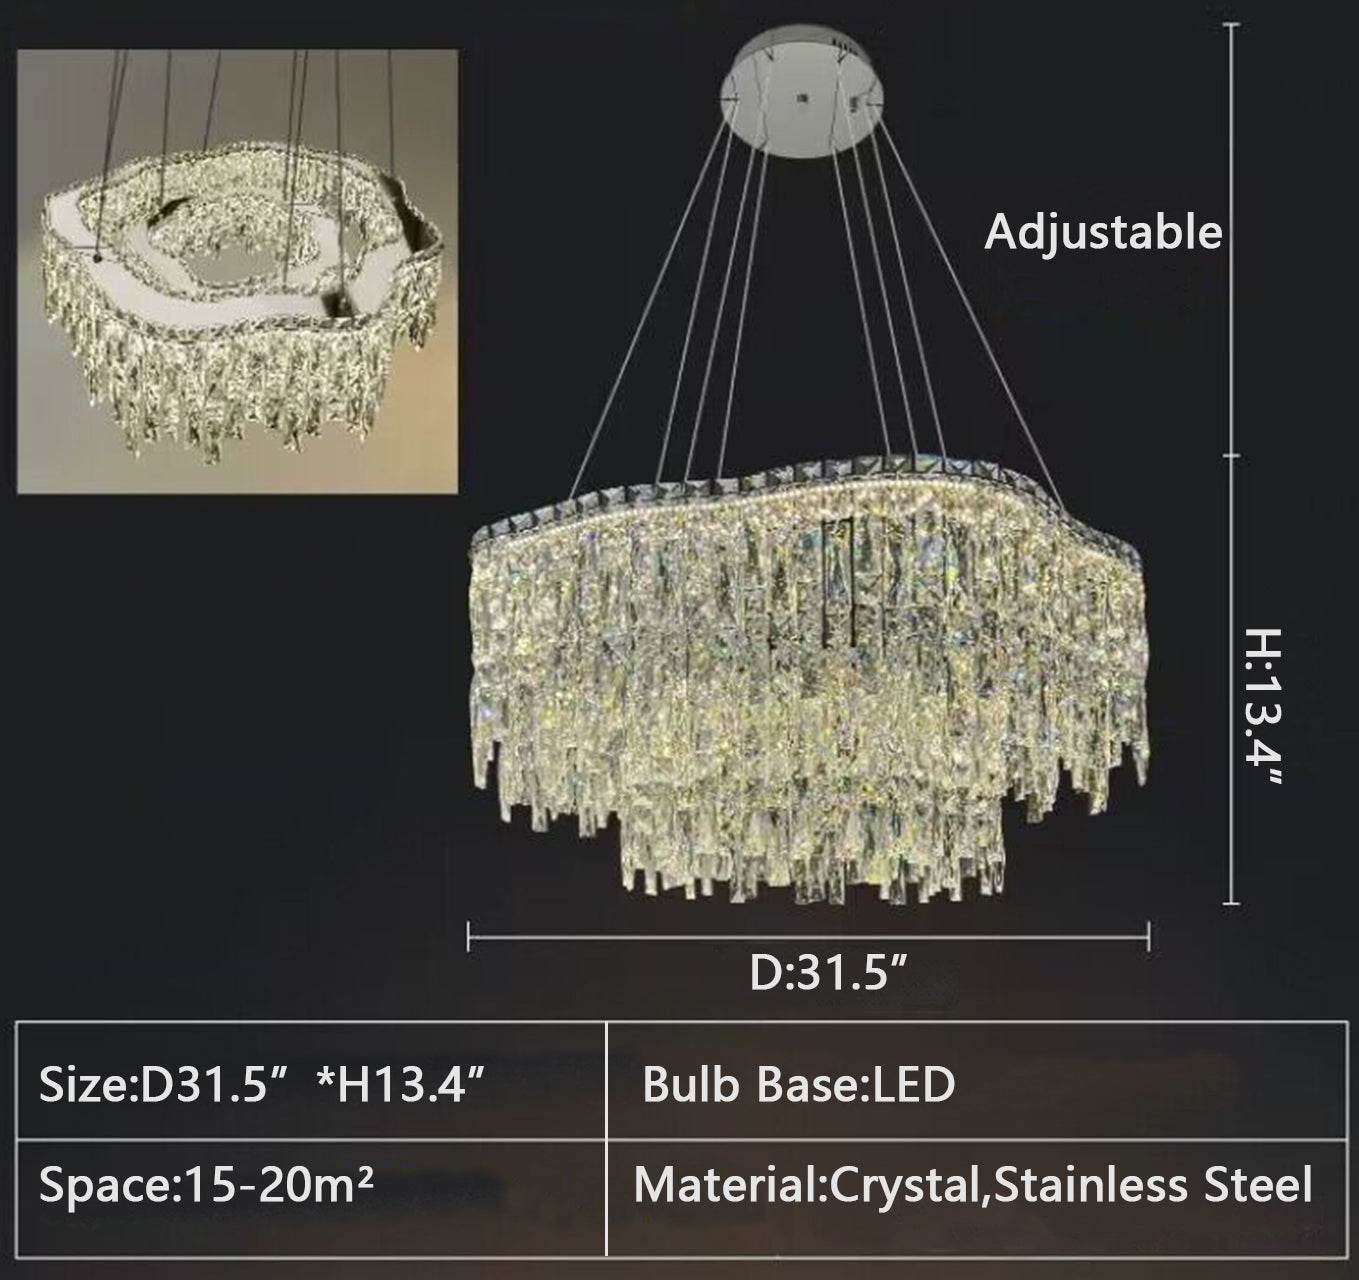 2Layer: D31.5"*H13.4" chandelier,chandeliers,pendant,rods,crystal,metal,stainless steel,clound,rectangle,oval,round,rings,ceiling,kitchen island,kitchen bar,bar,dinng table,dining bar,living room,bedroom,bathroom,home office